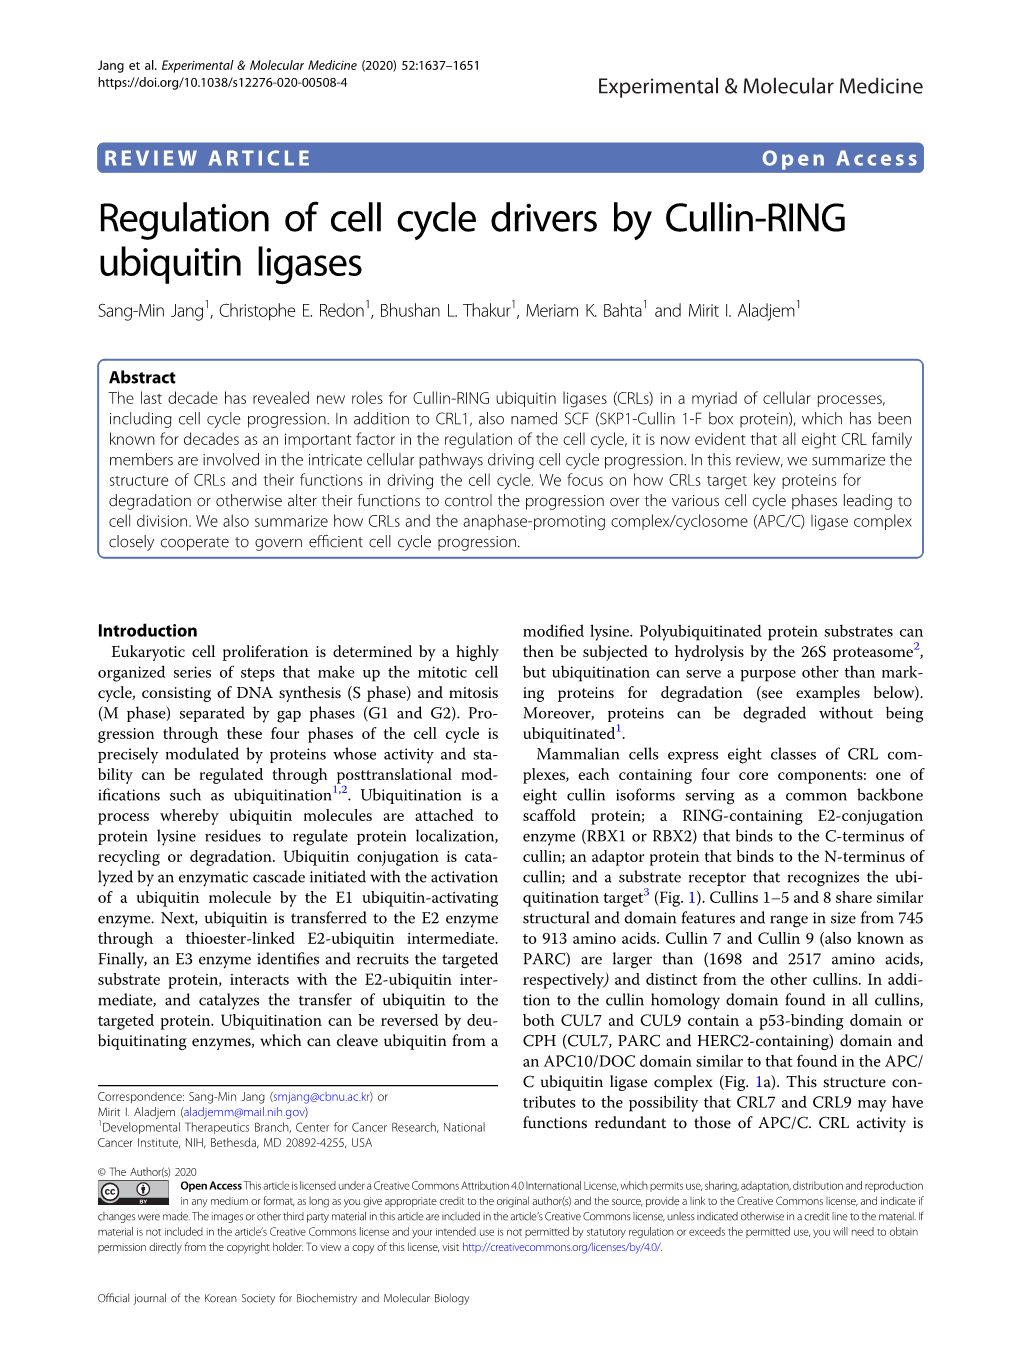 Regulation of Cell Cycle Drivers by Cullin-RING Ubiquitin Ligases Sang-Min Jang1, Christophe E